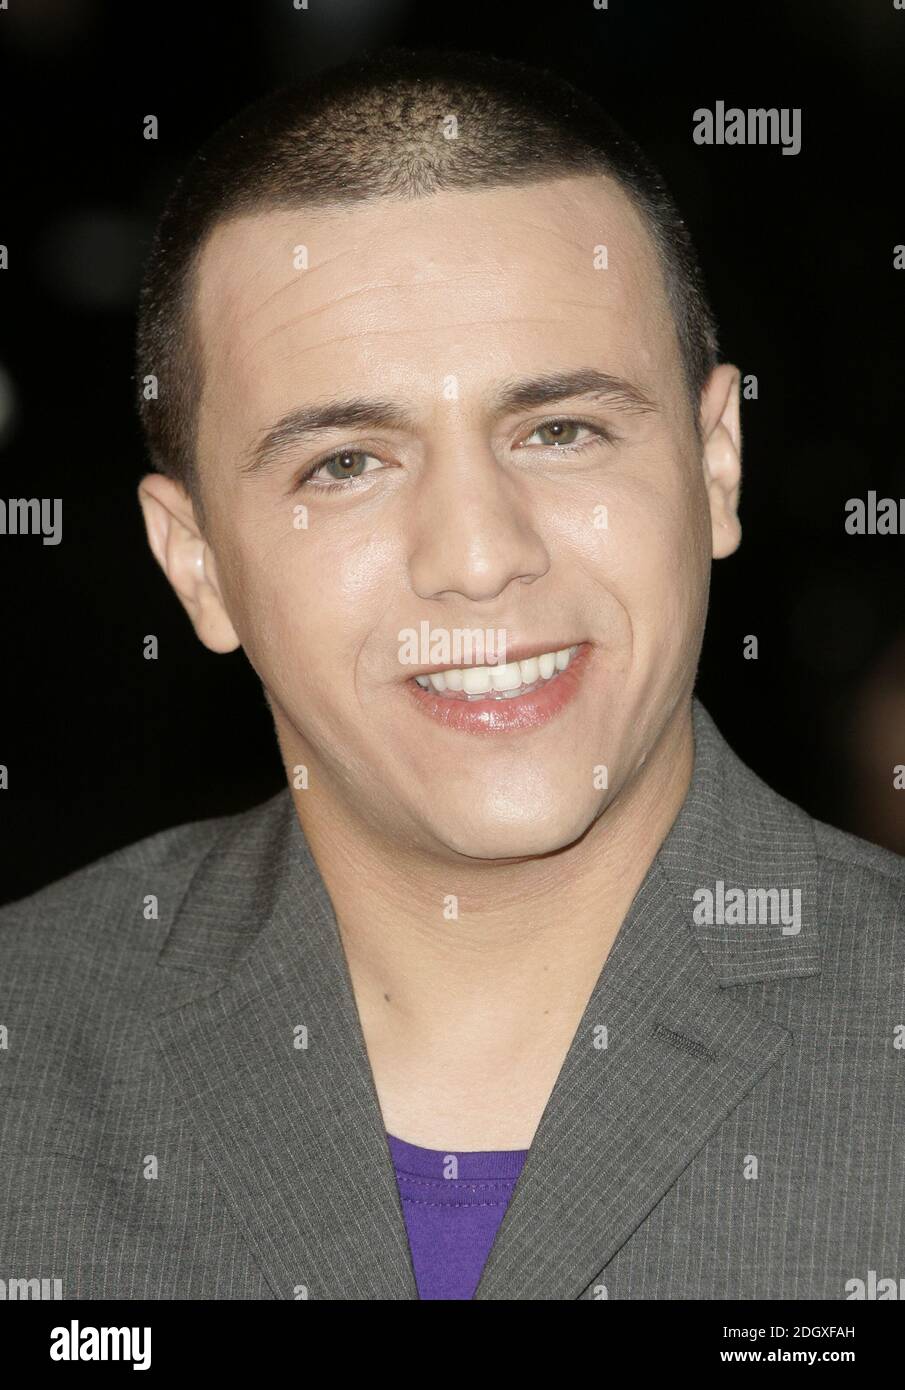 Faudel arriving on the red carpet at the NRJ Awards, Palais De Festival, Cannes, France. Stock Photo